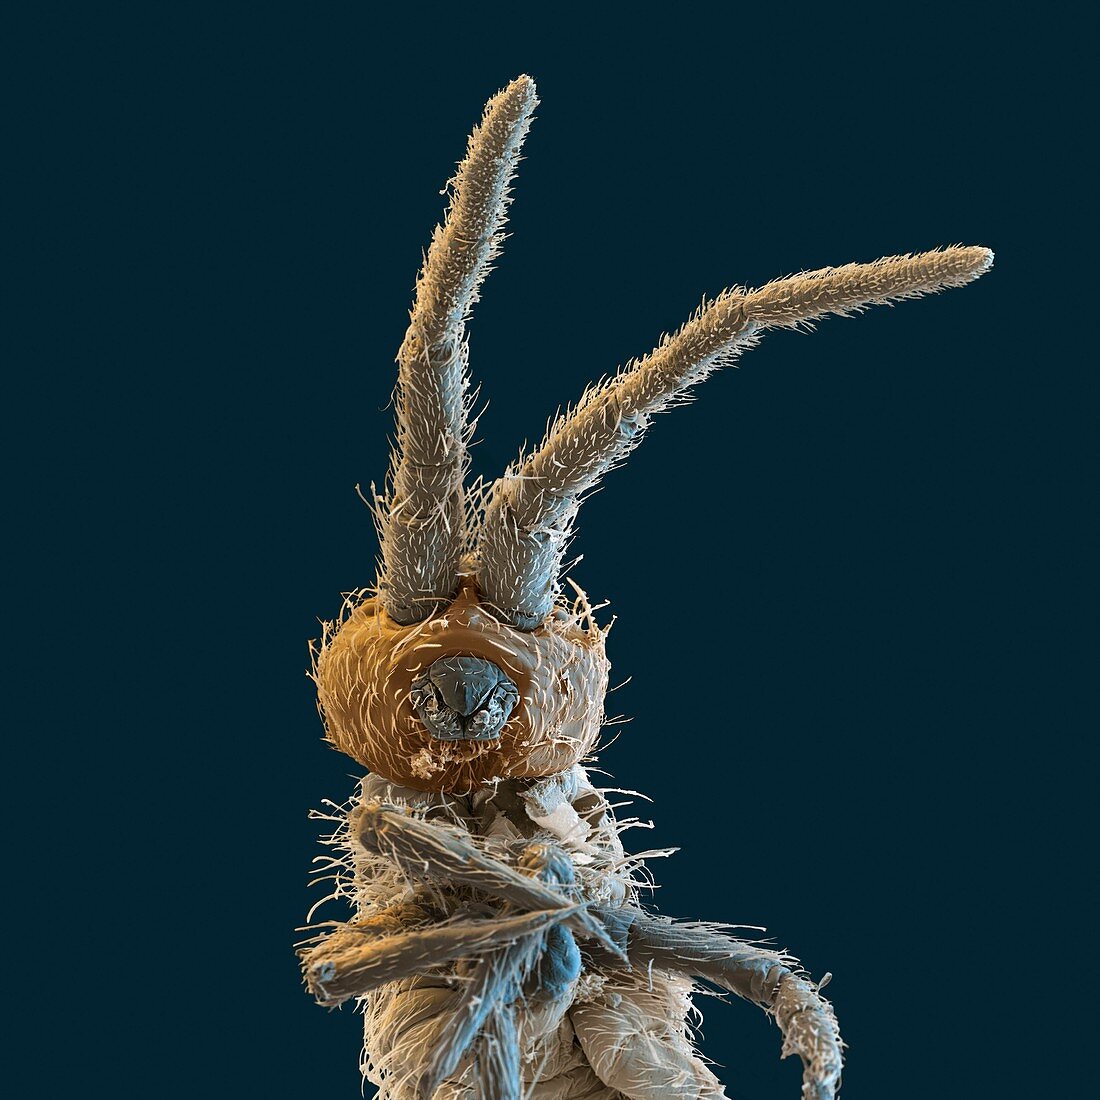 Collembola 75x - Collembola, Springschwanz, 75-1